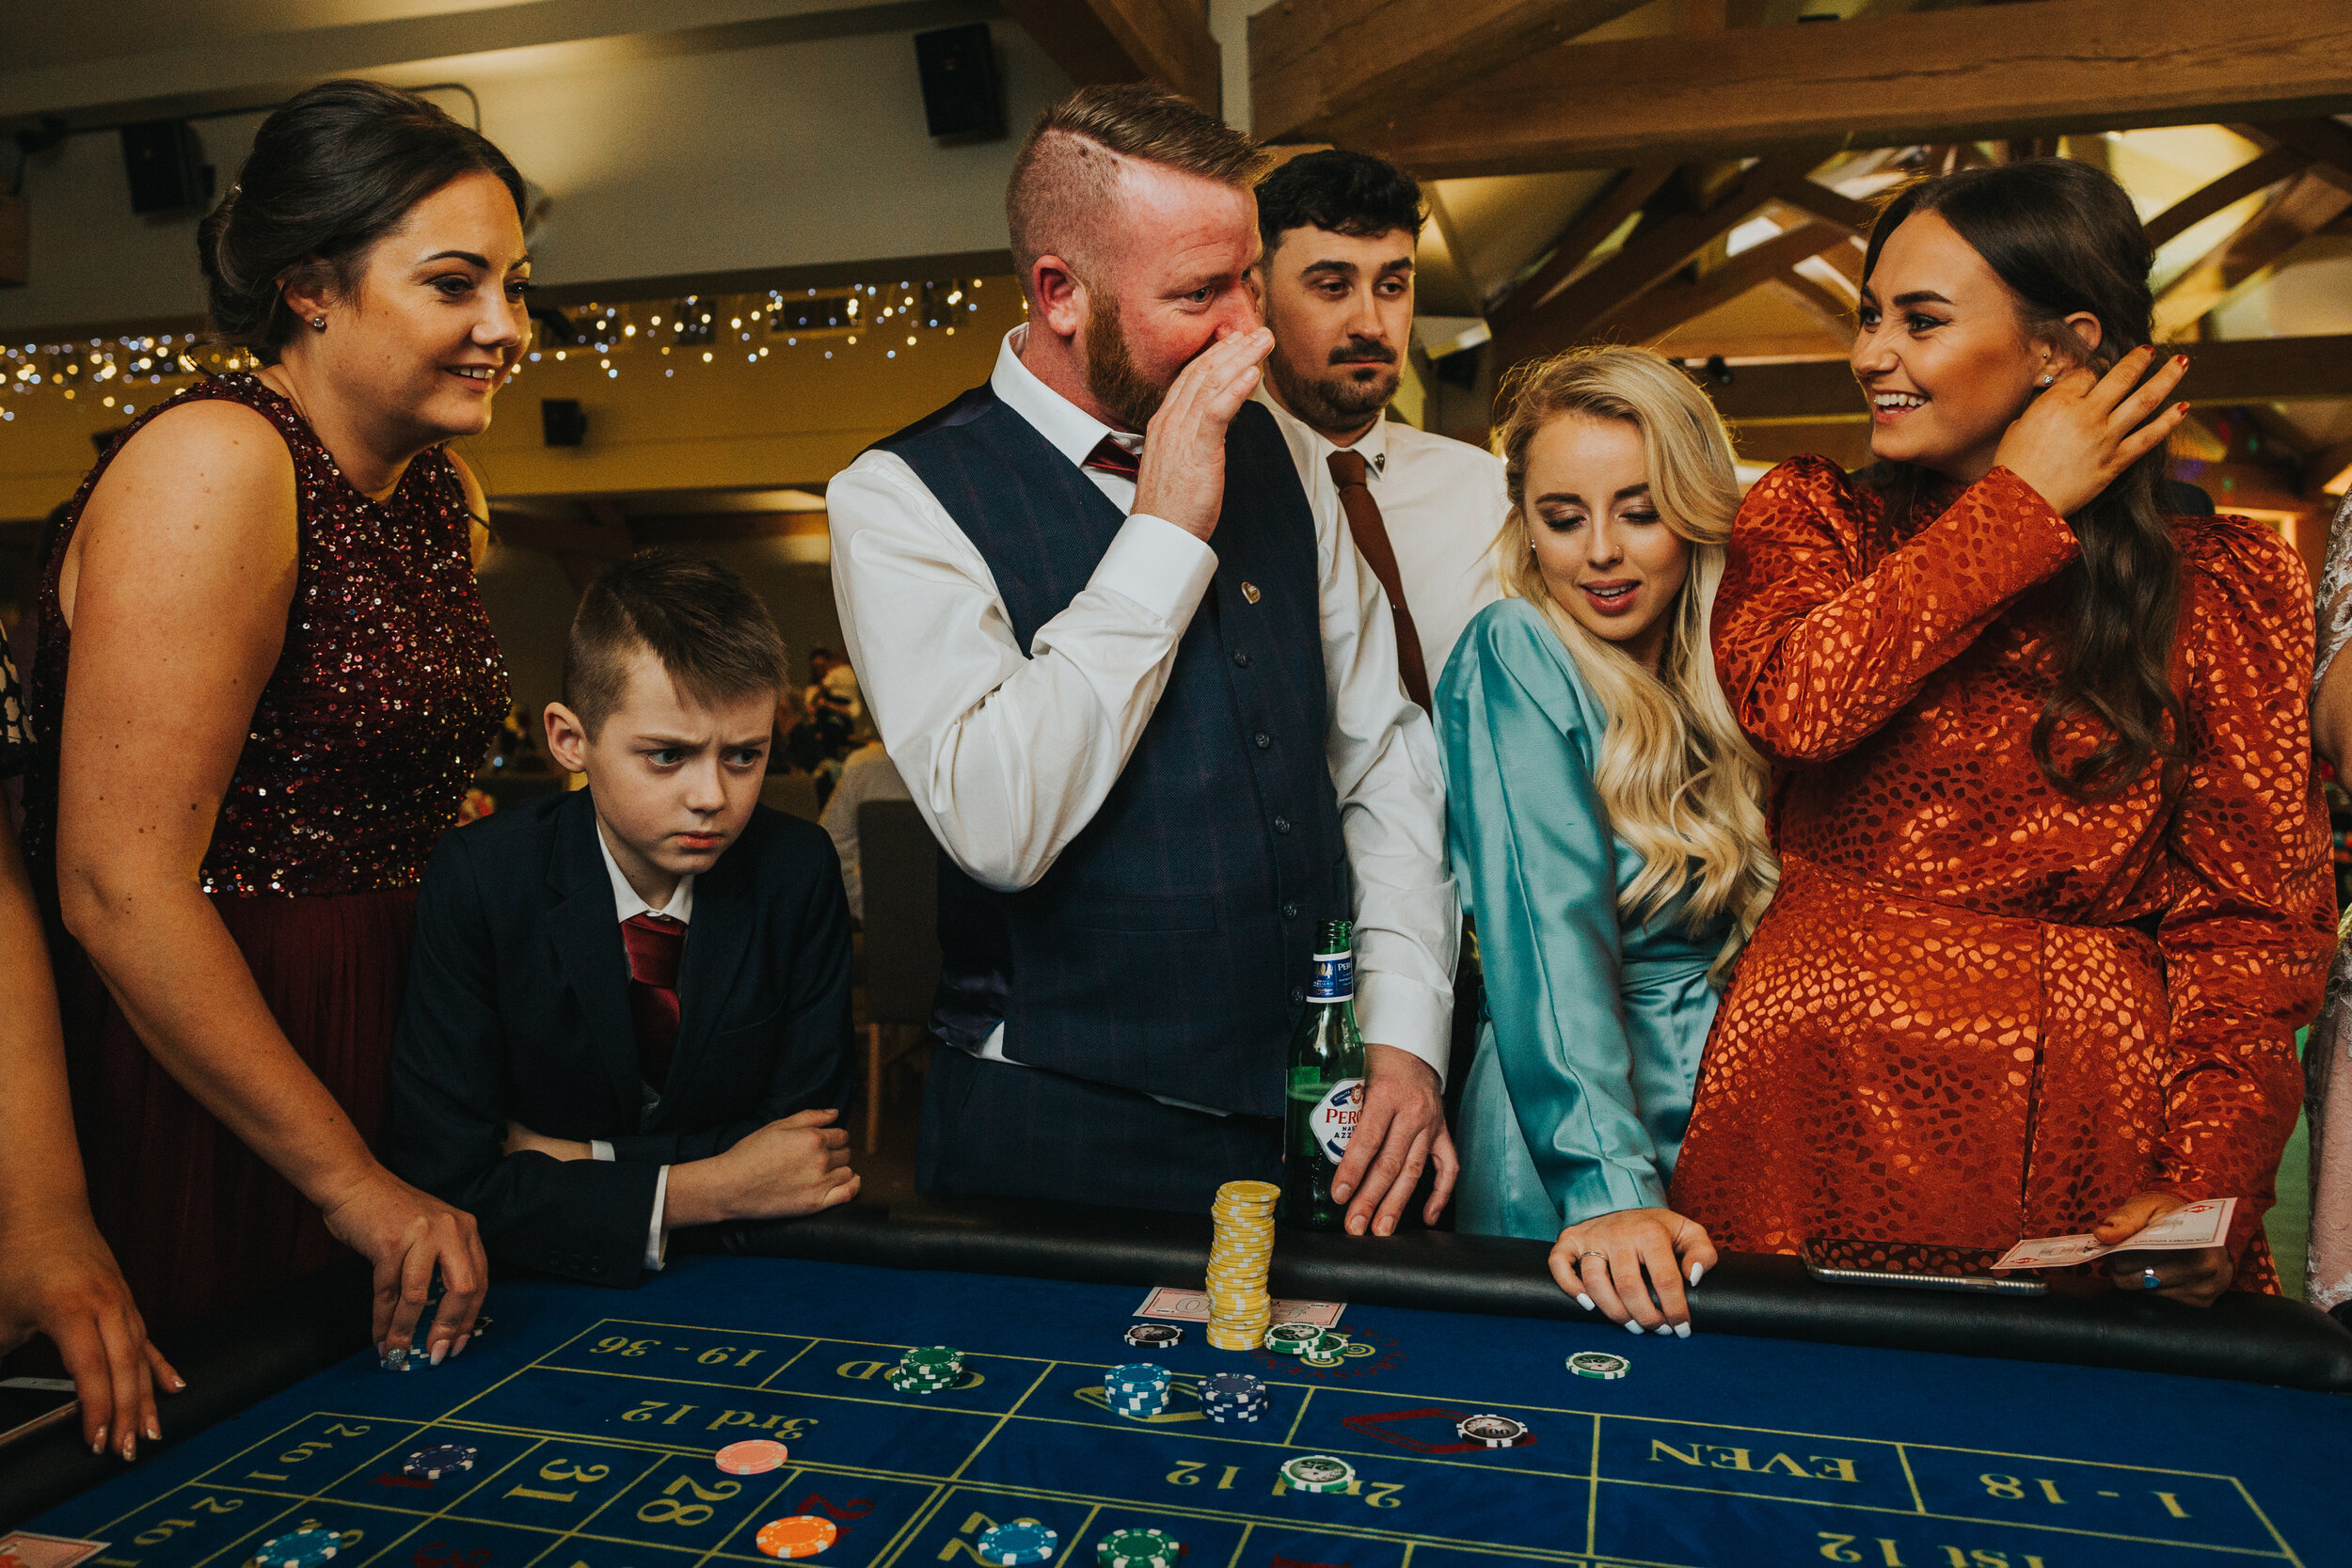 Guests looking glamorous at Casino tables. 